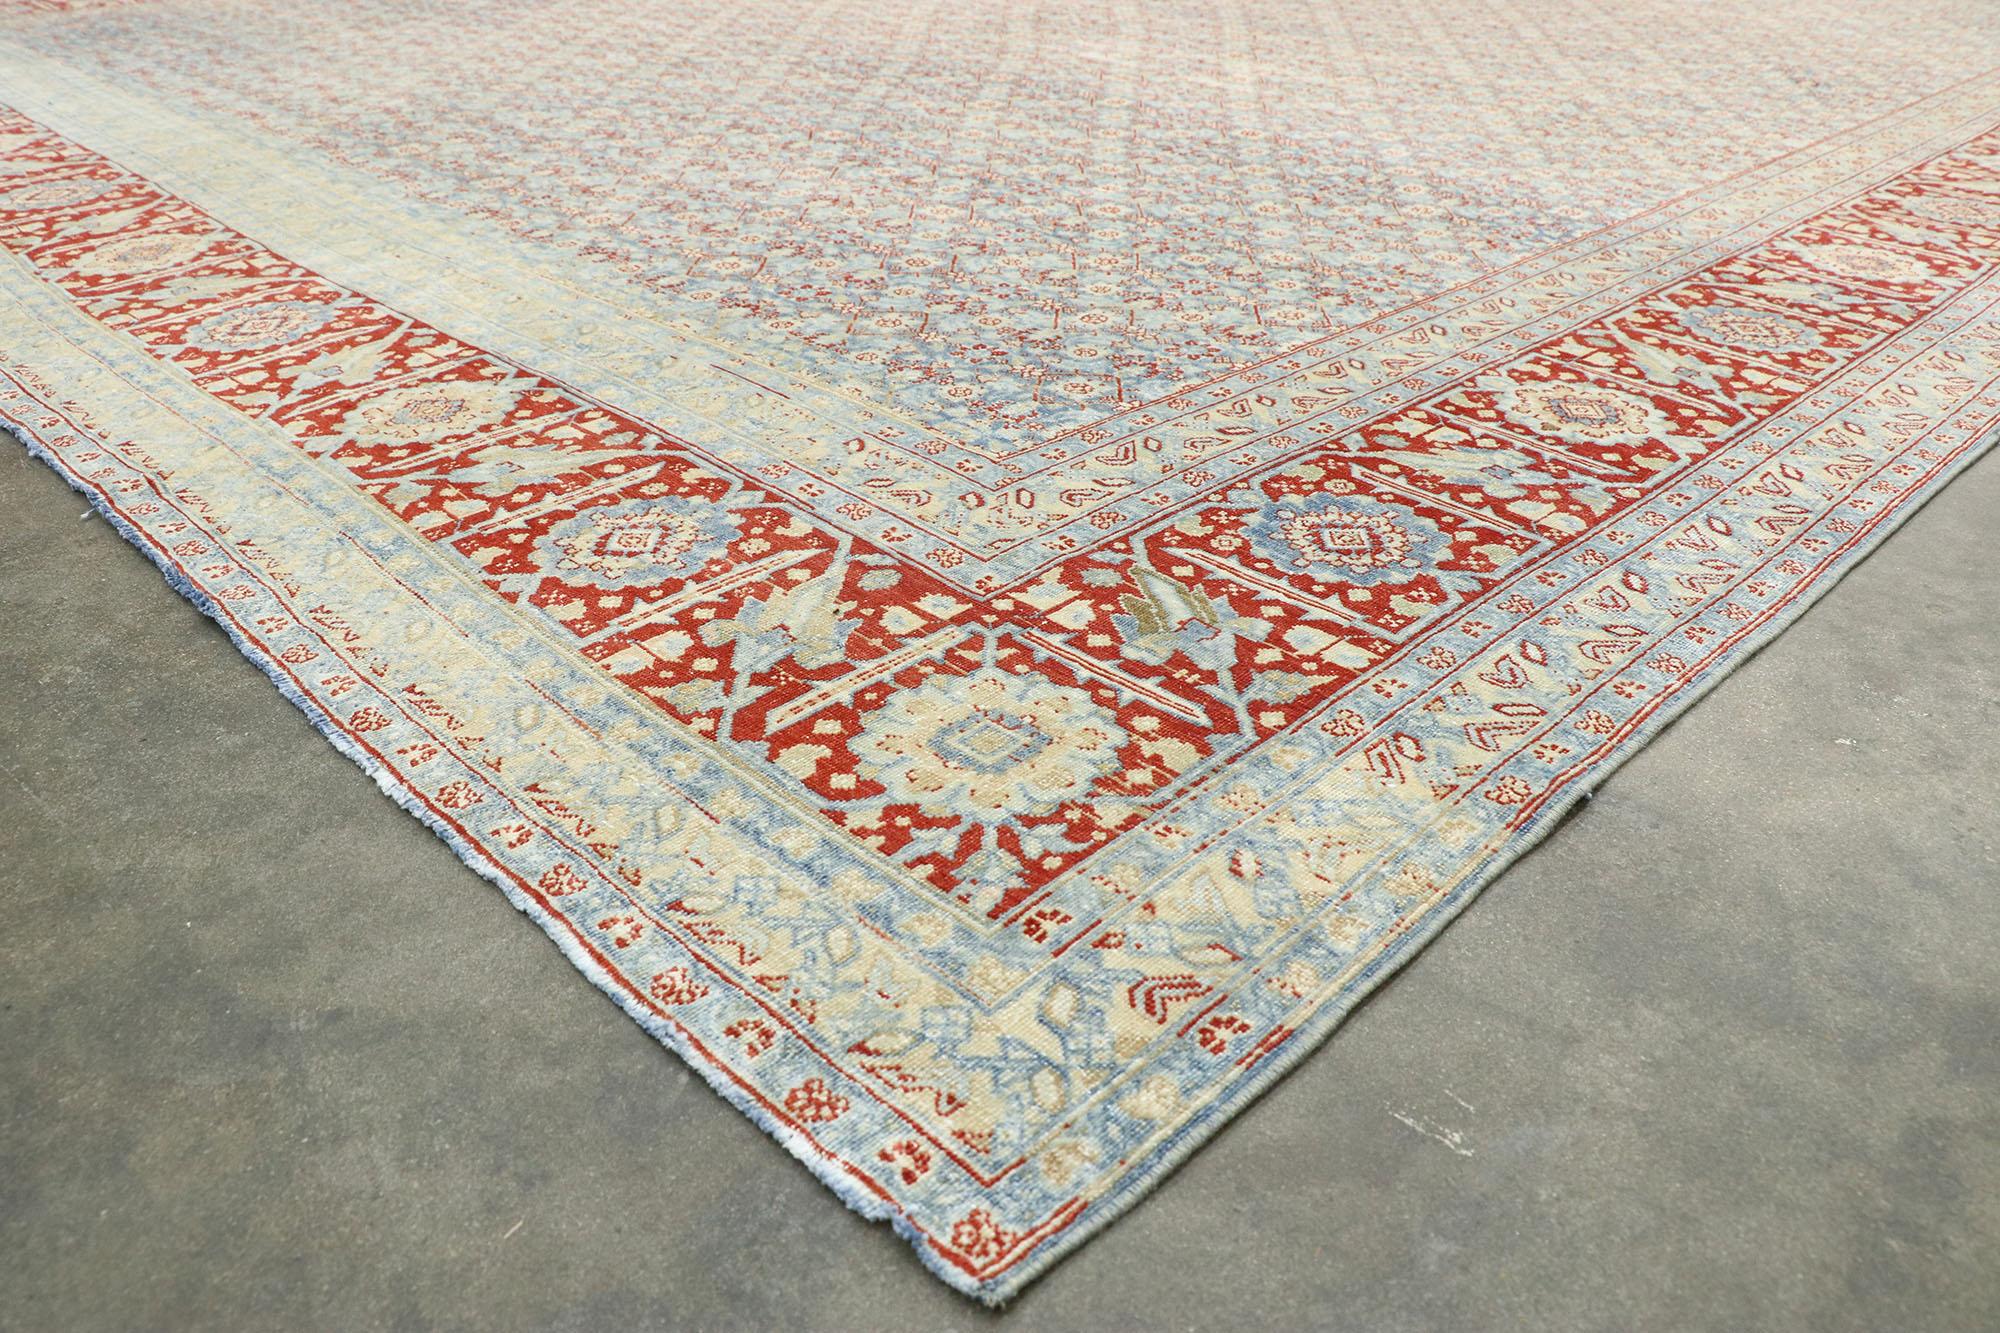 20th Century Vintage Persian Tabriz Design Rug with Southern Living American Colonial Style For Sale